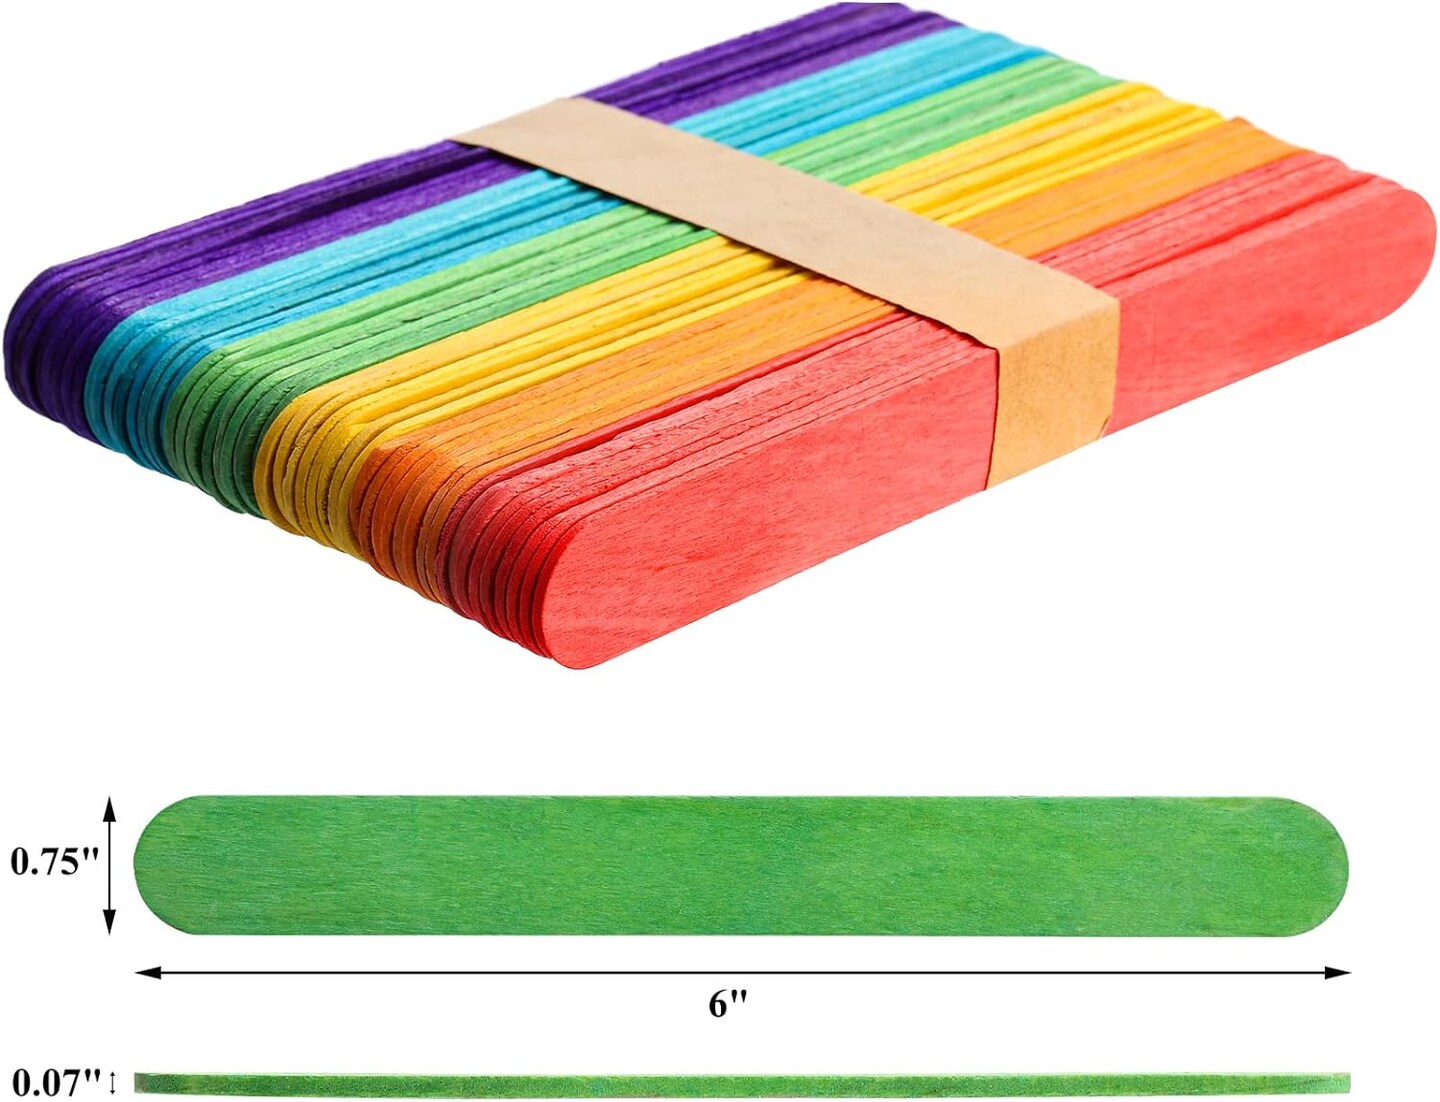 1000 Pack Colored Craft Sticks, 6 Inch Wooden Popsicle Sticks, Ice Pop Ice Cream Sticks Jumbo Wood Sticks for Kids&#x27; Art, DIY Projects, Home Classroom Craft Supplies